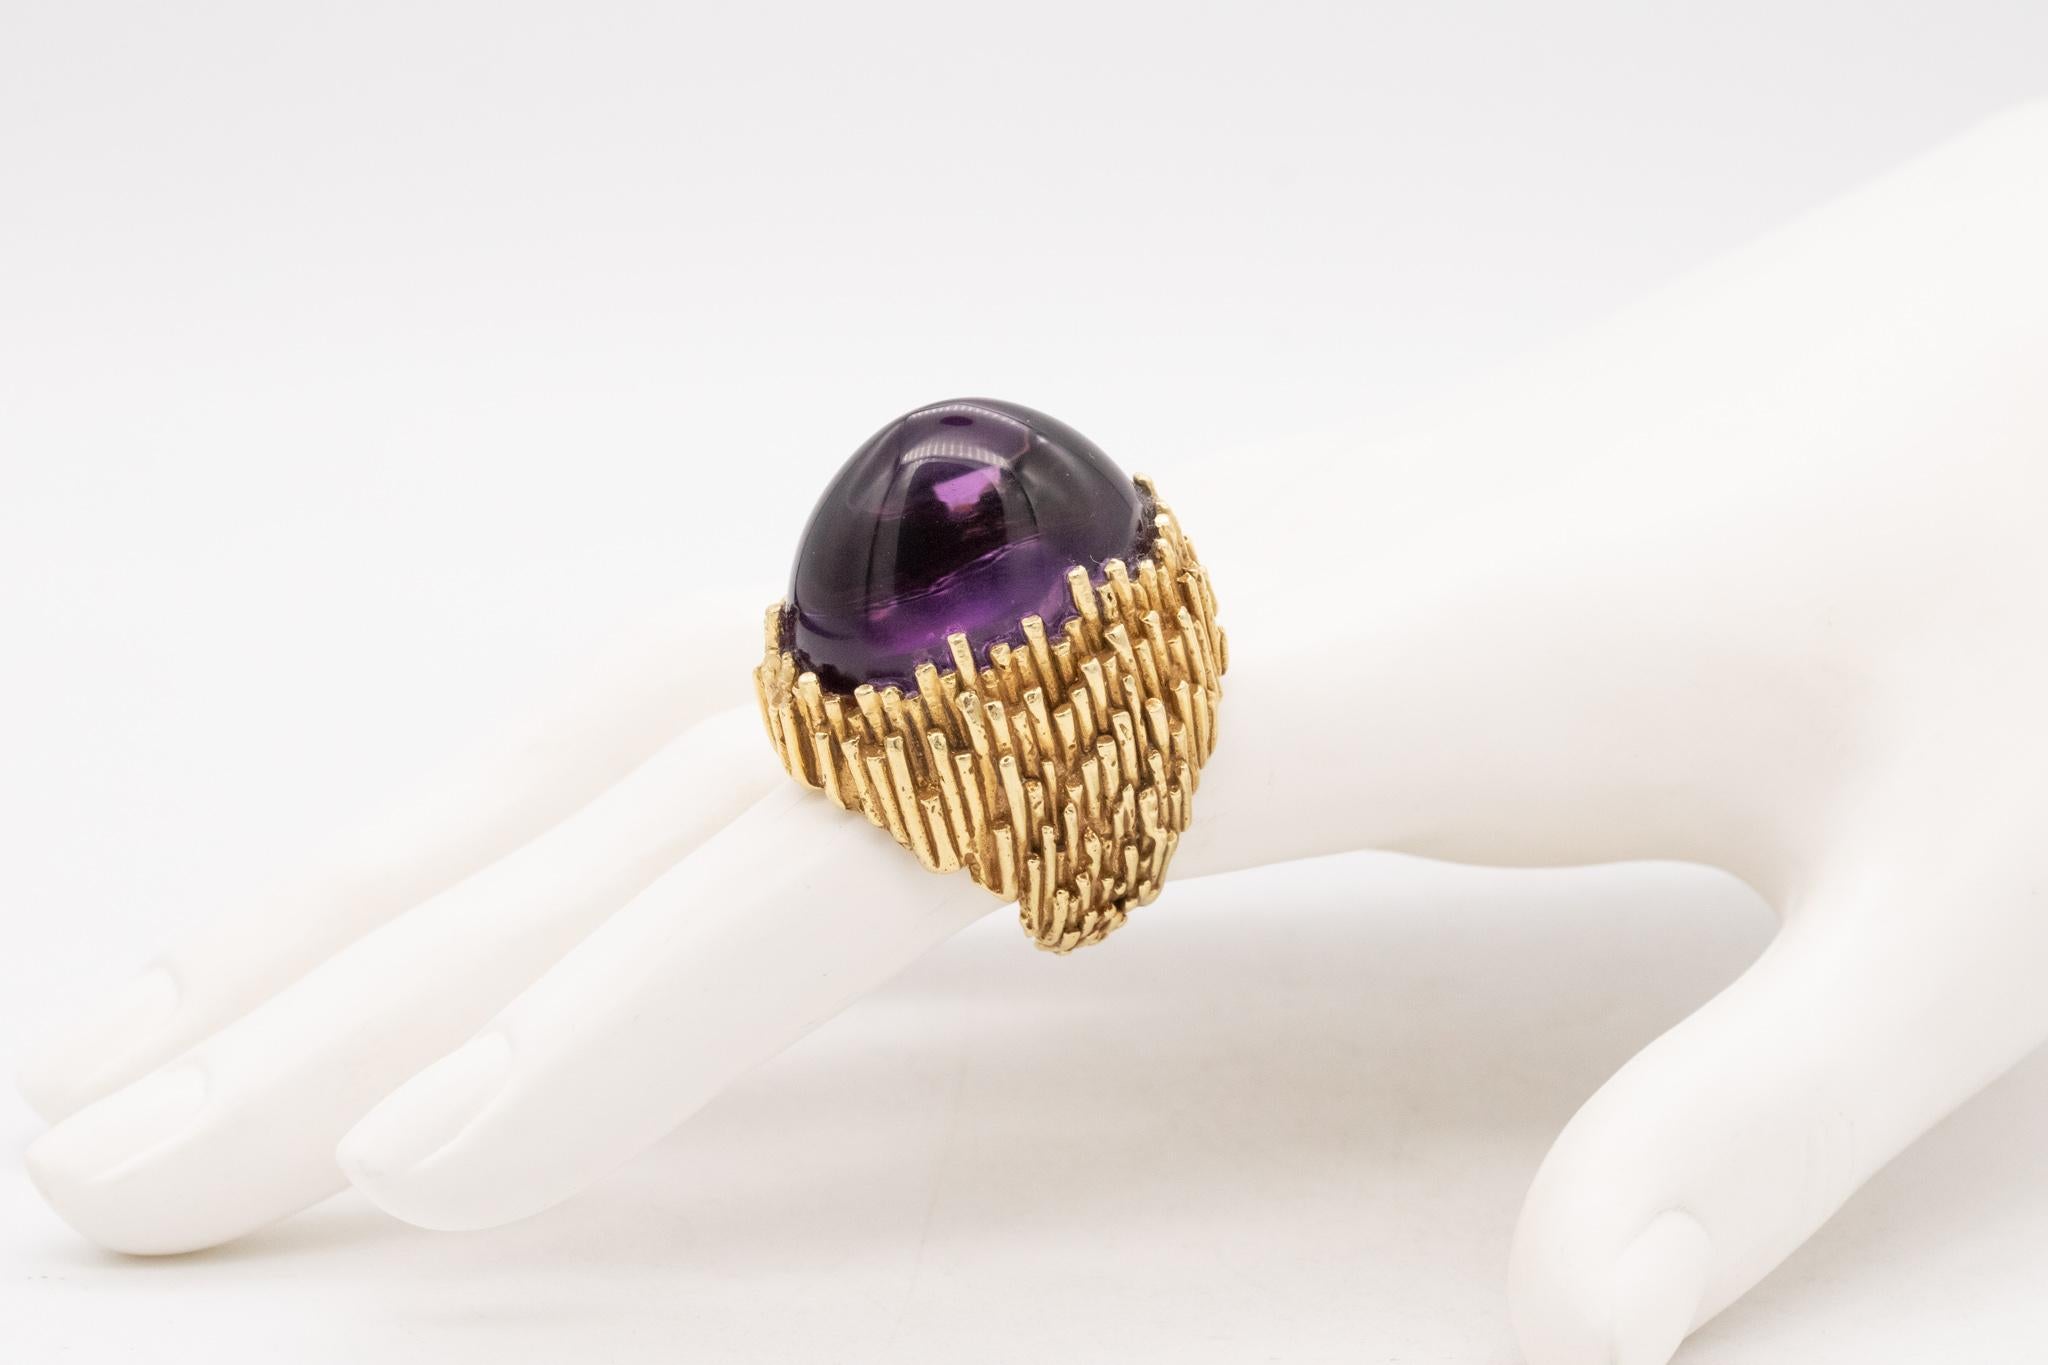 Modernist Erwin Pearl 1960 New York Massive Cocktail Ring In 18Kt Gold 45.28 Cts Amethyst